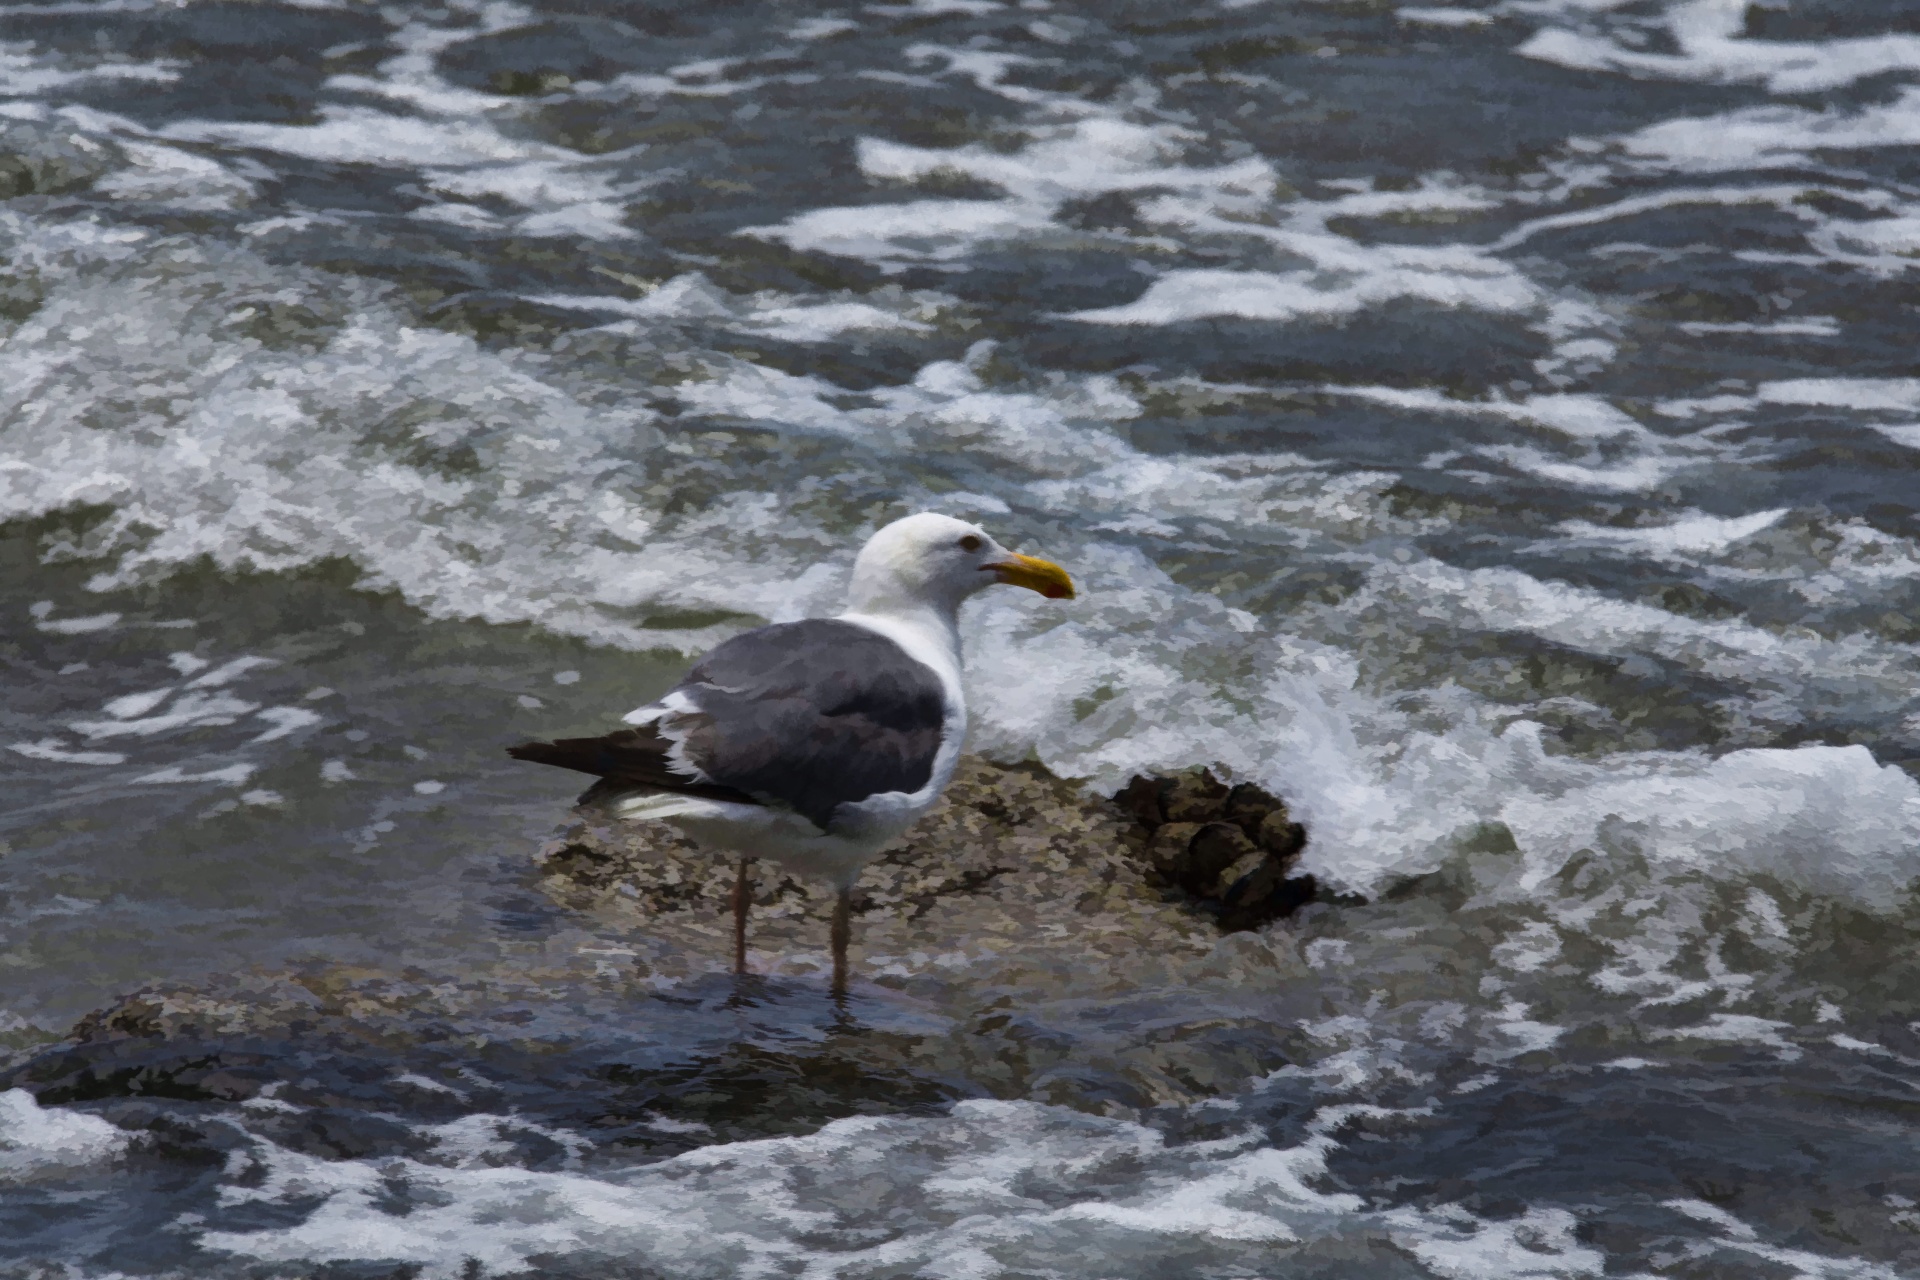 seagull on small mussel covered rock in shallow ocean waters